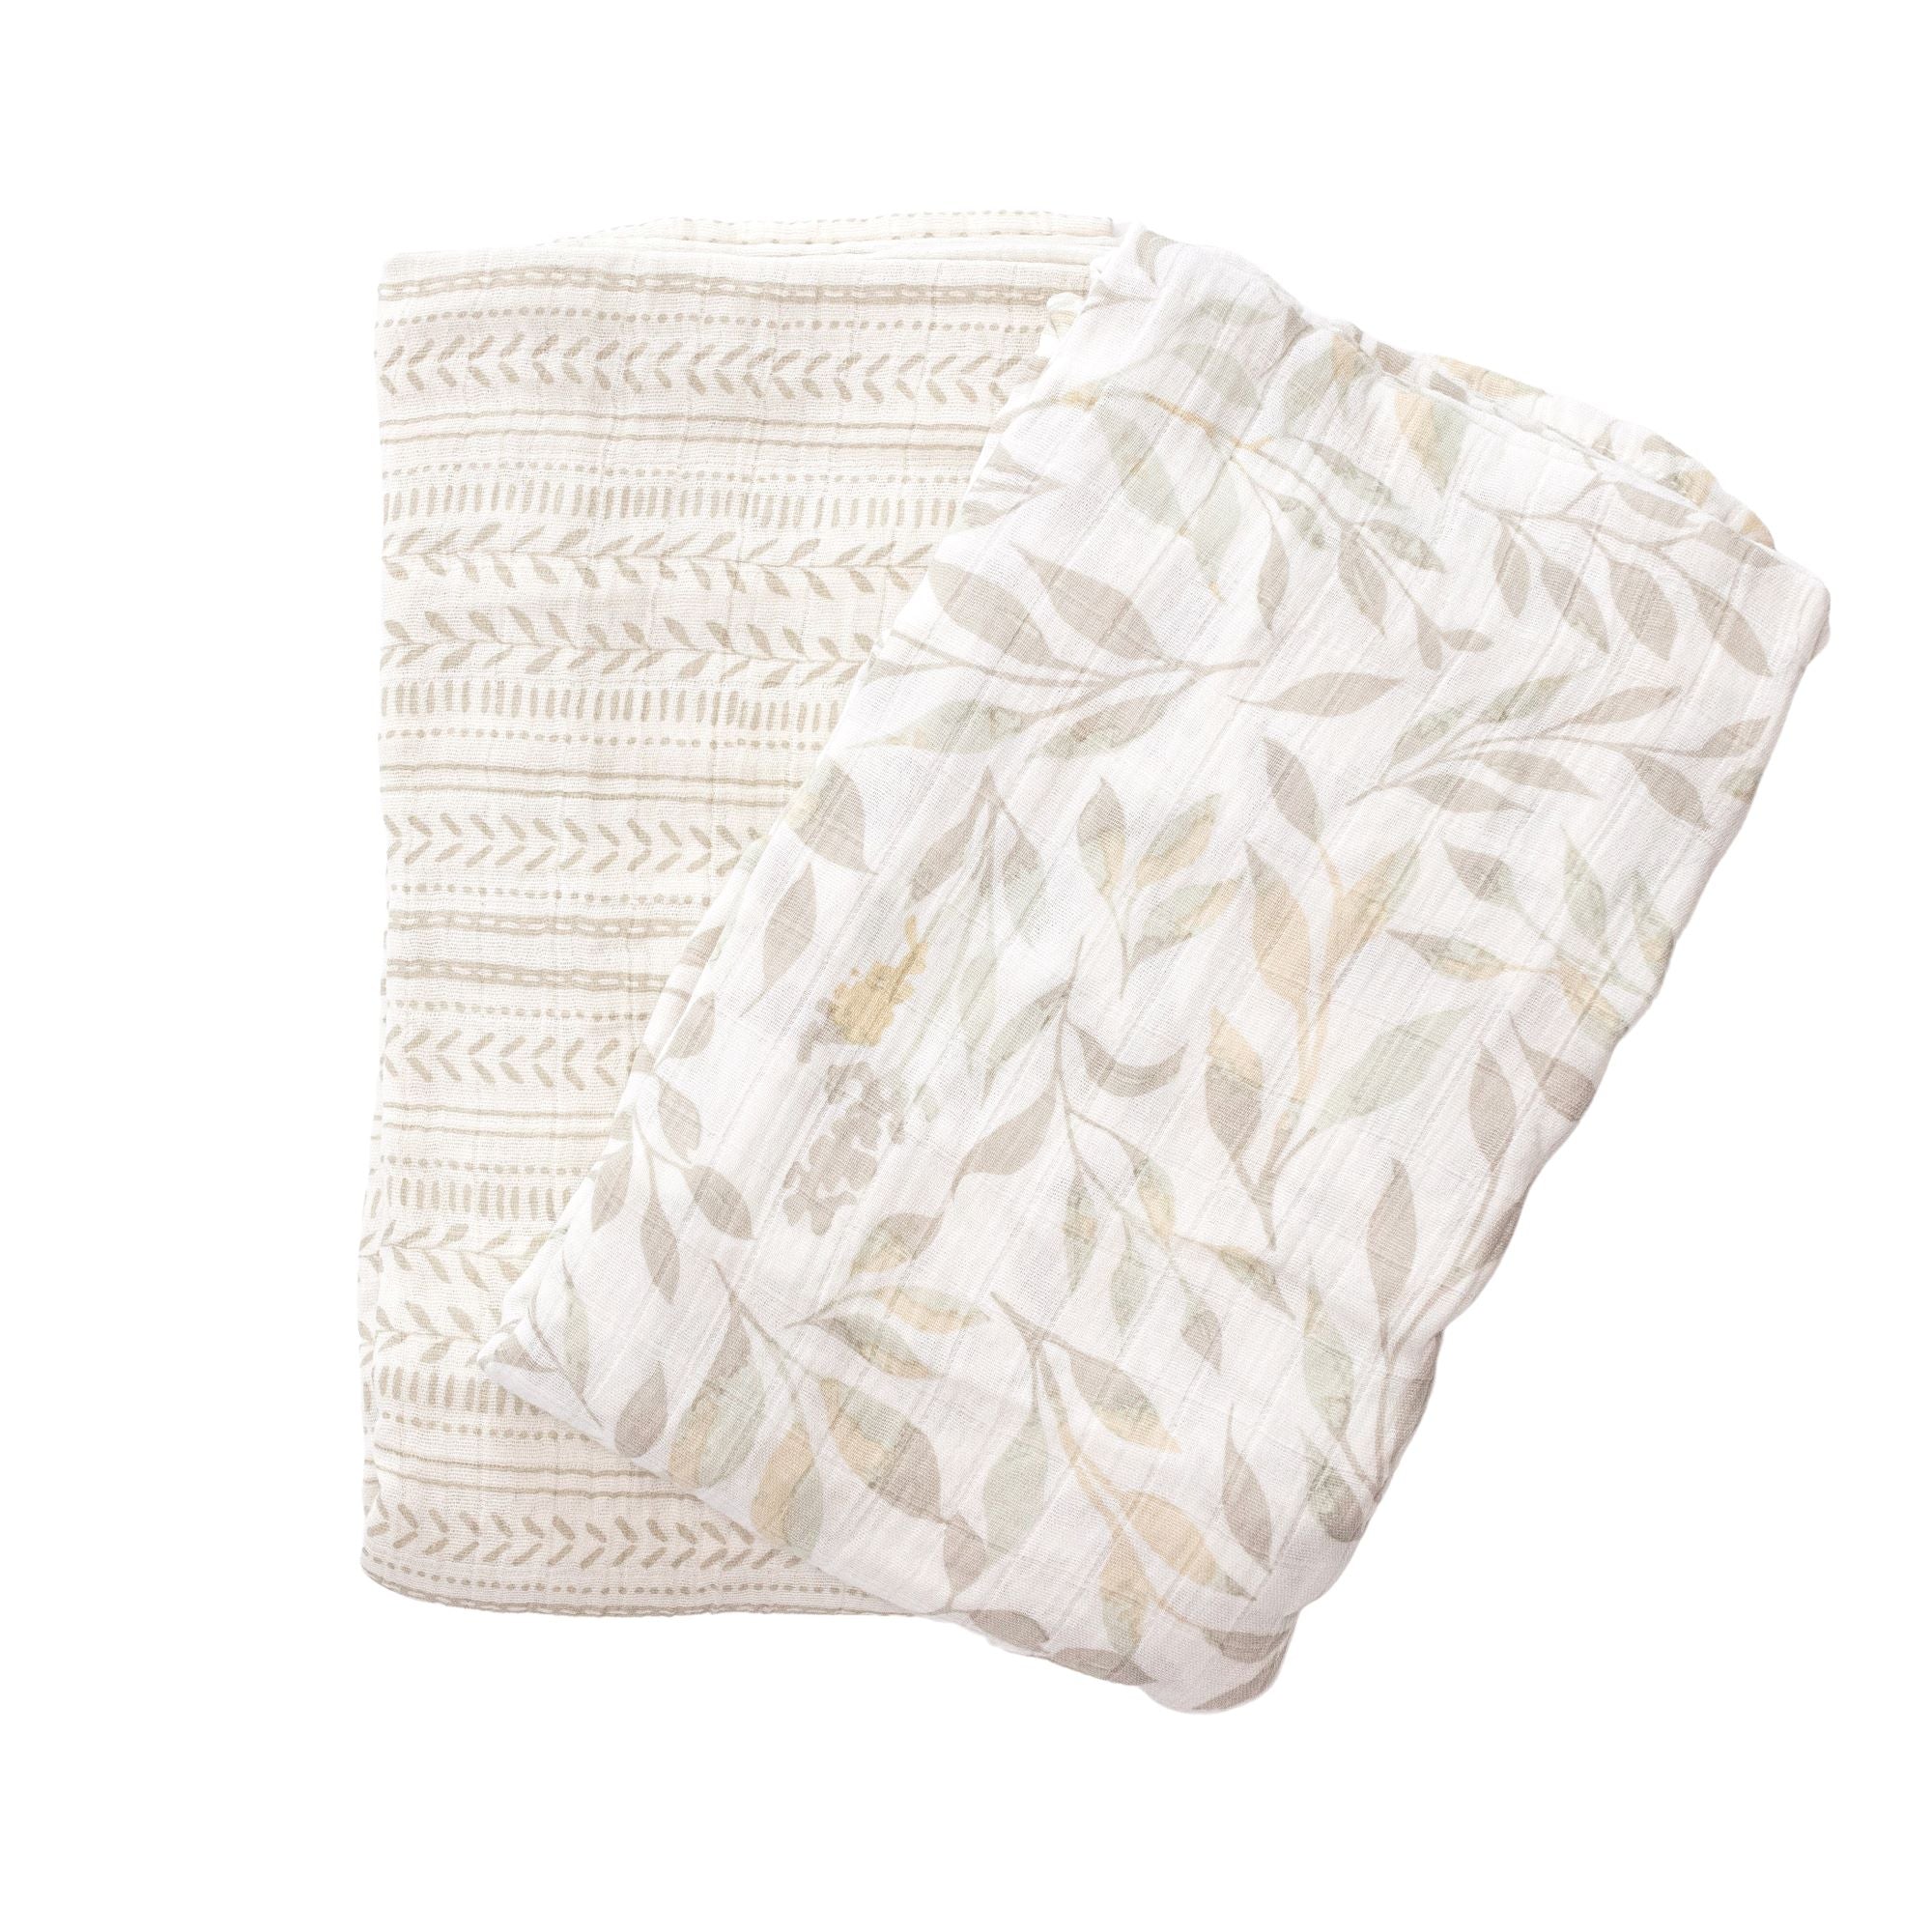 Crane Baby Muslin Swaddle Set Of 2 Multicolor Leaf  Willow Collection - Multicolor